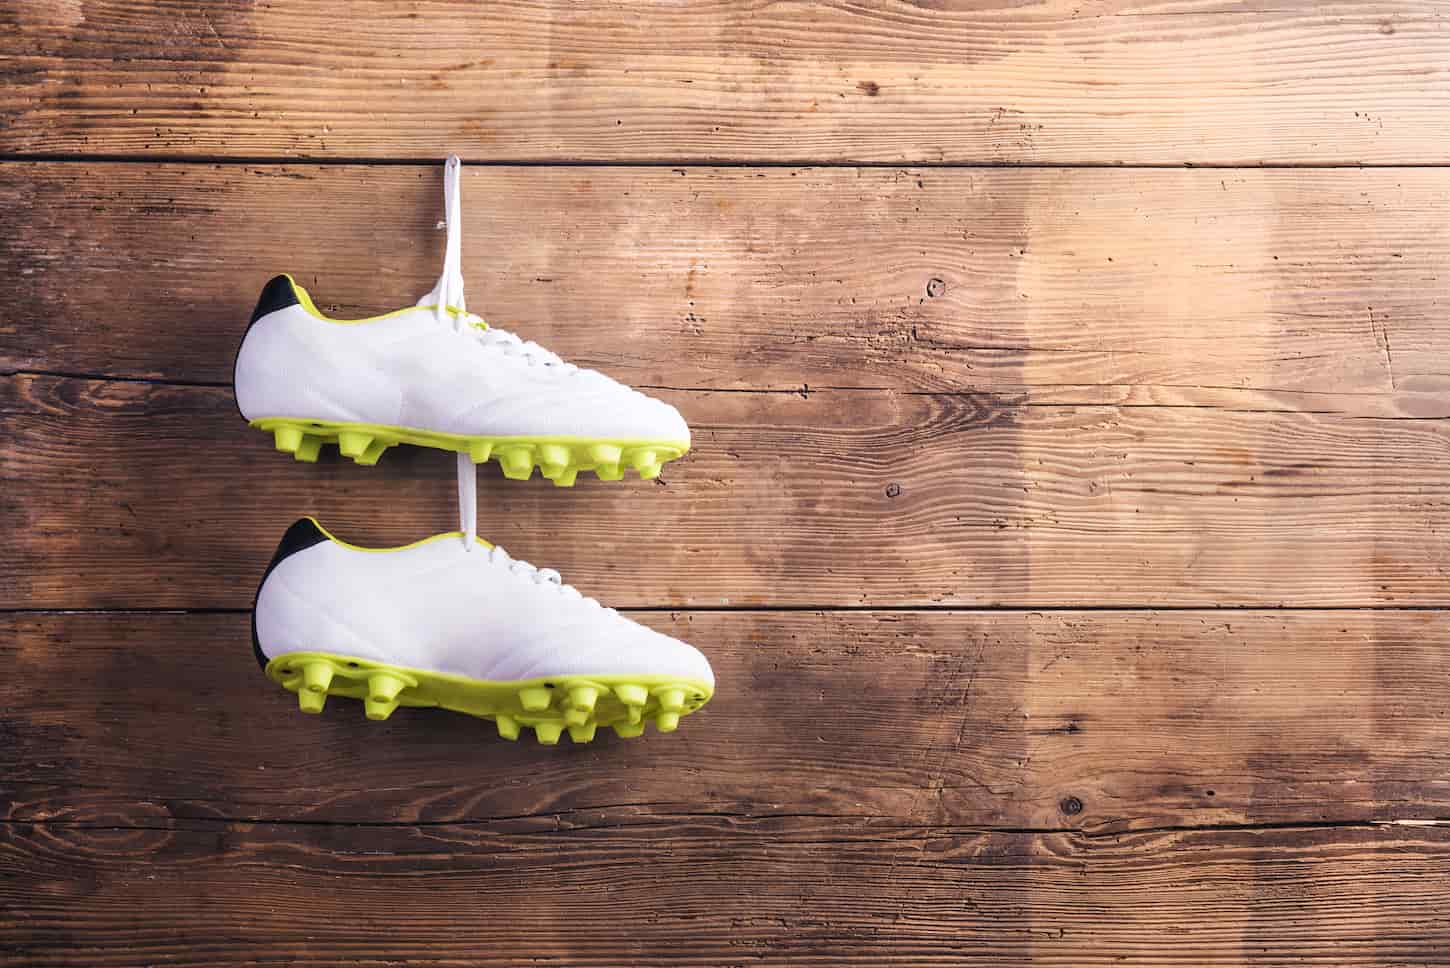 An image of a Pair of football shoes hanging on a nail on a wooden fence background.